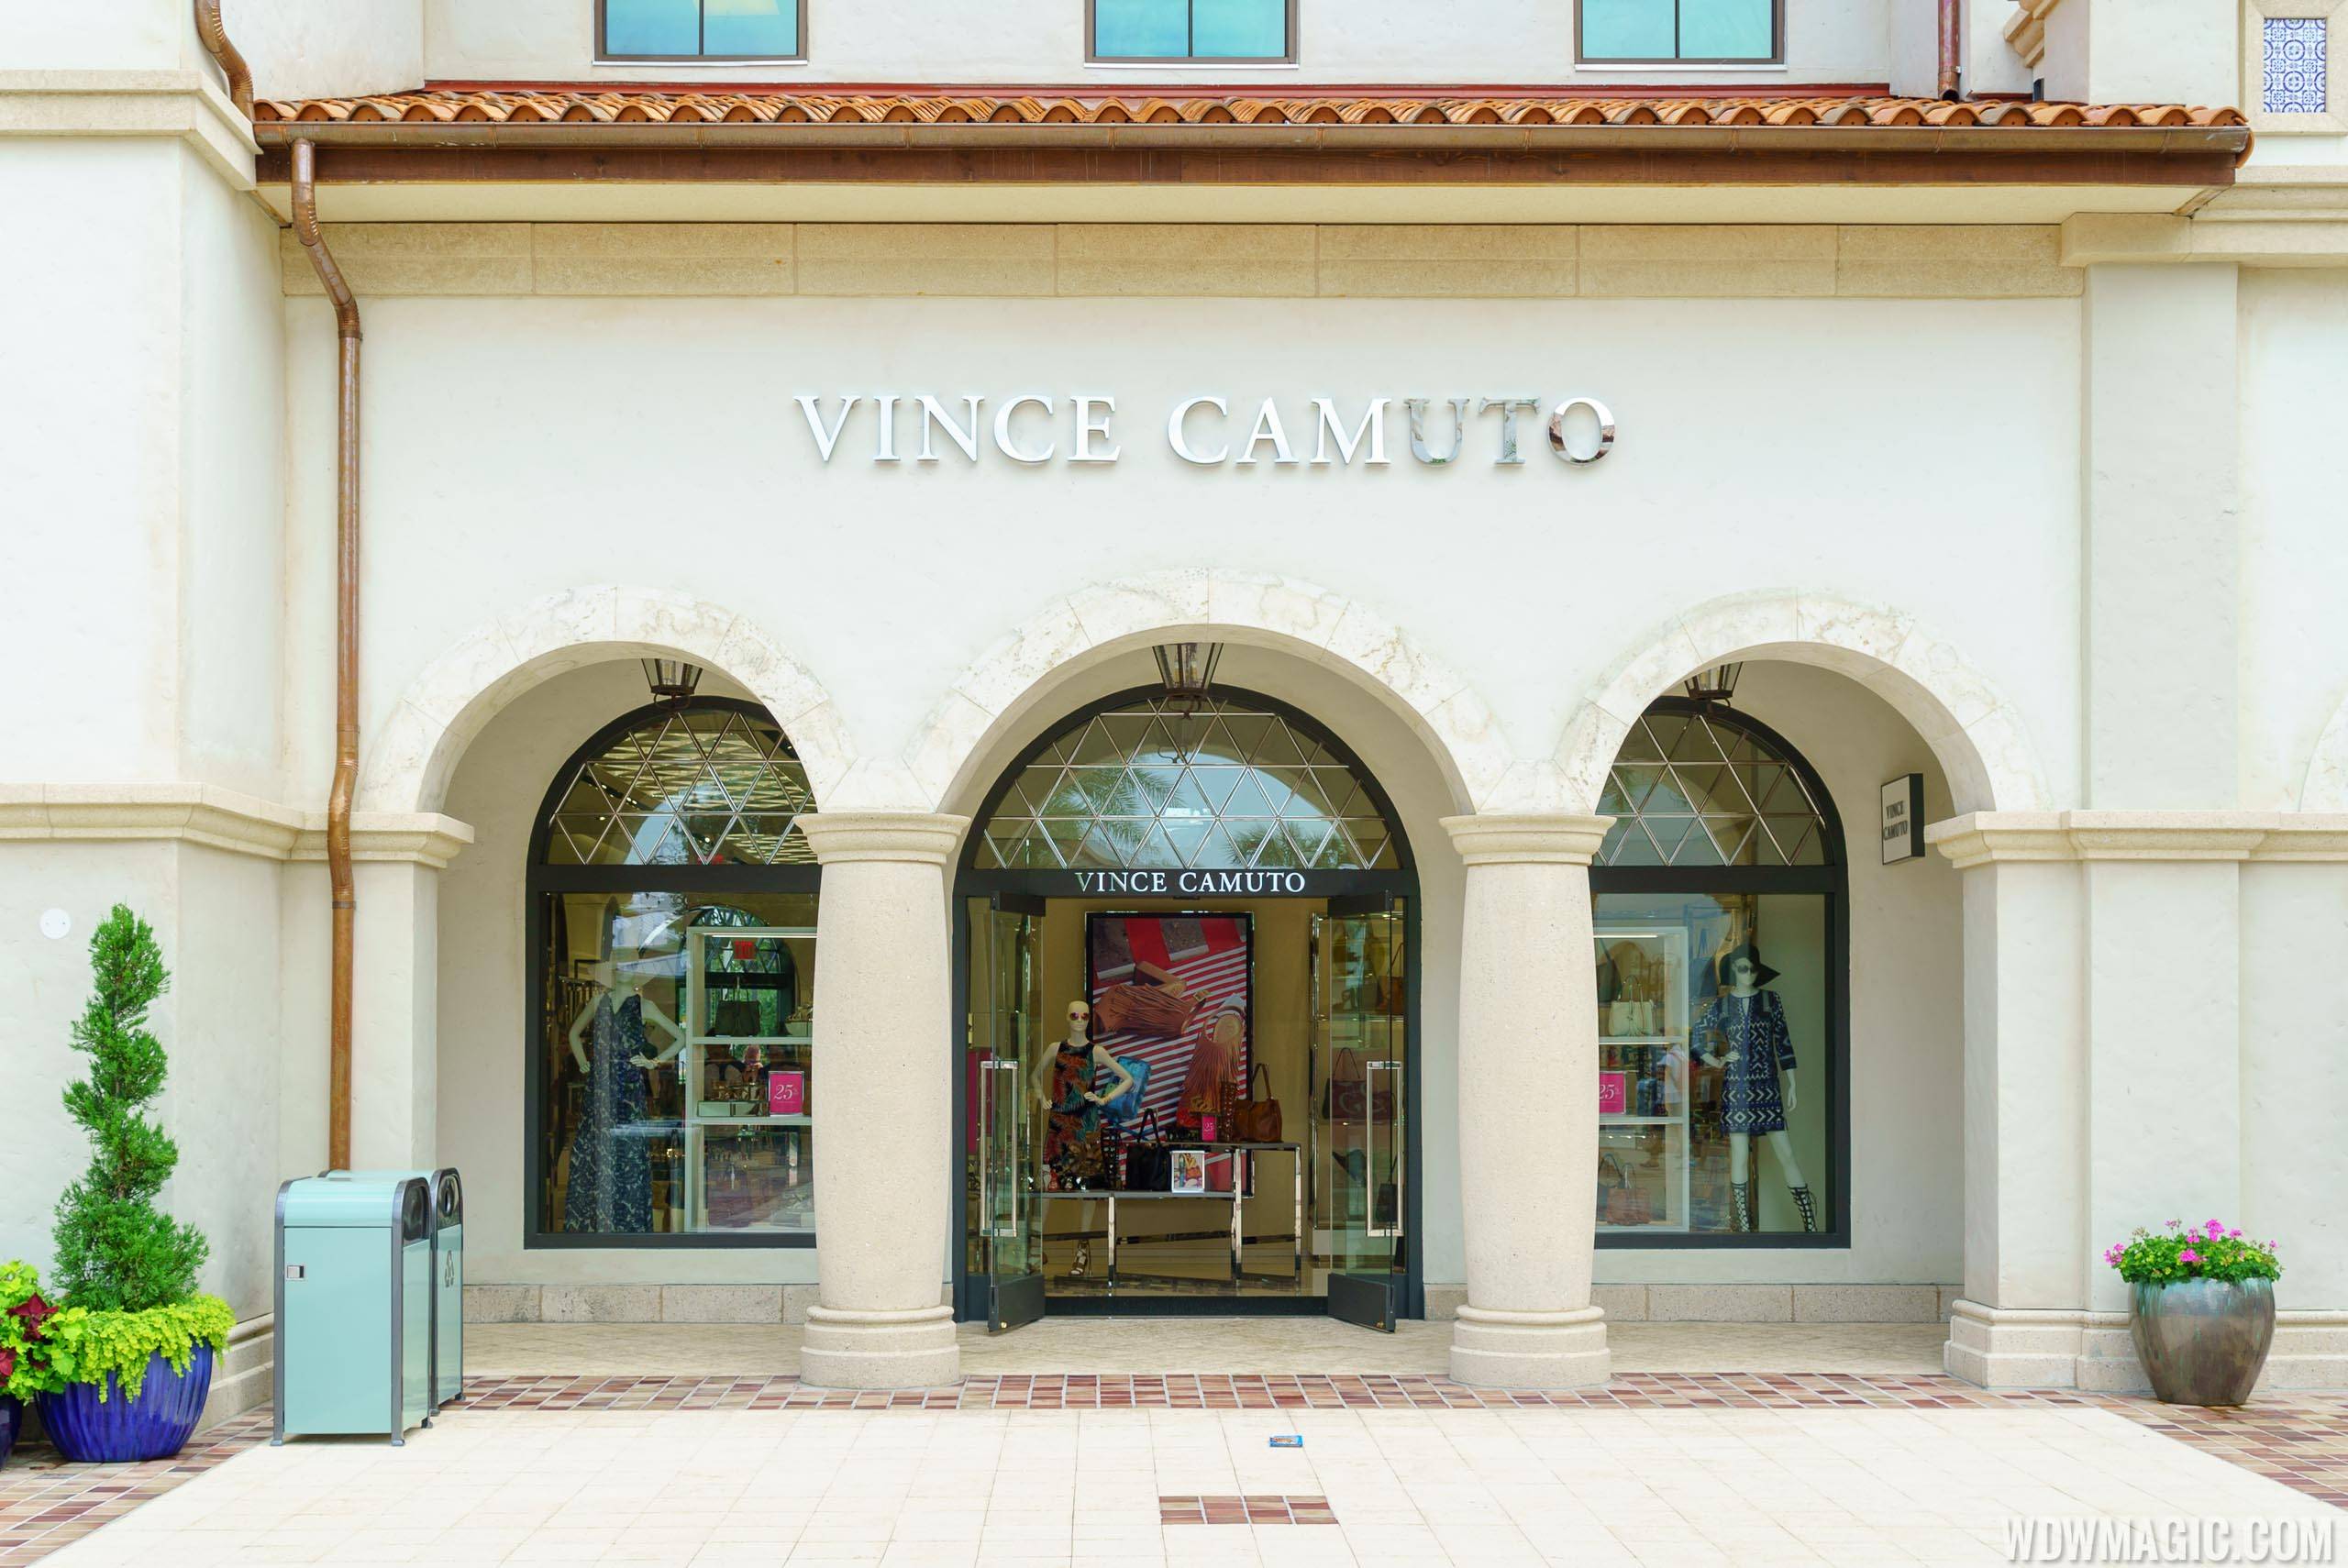 Vince Camuto store front at Disney Springs